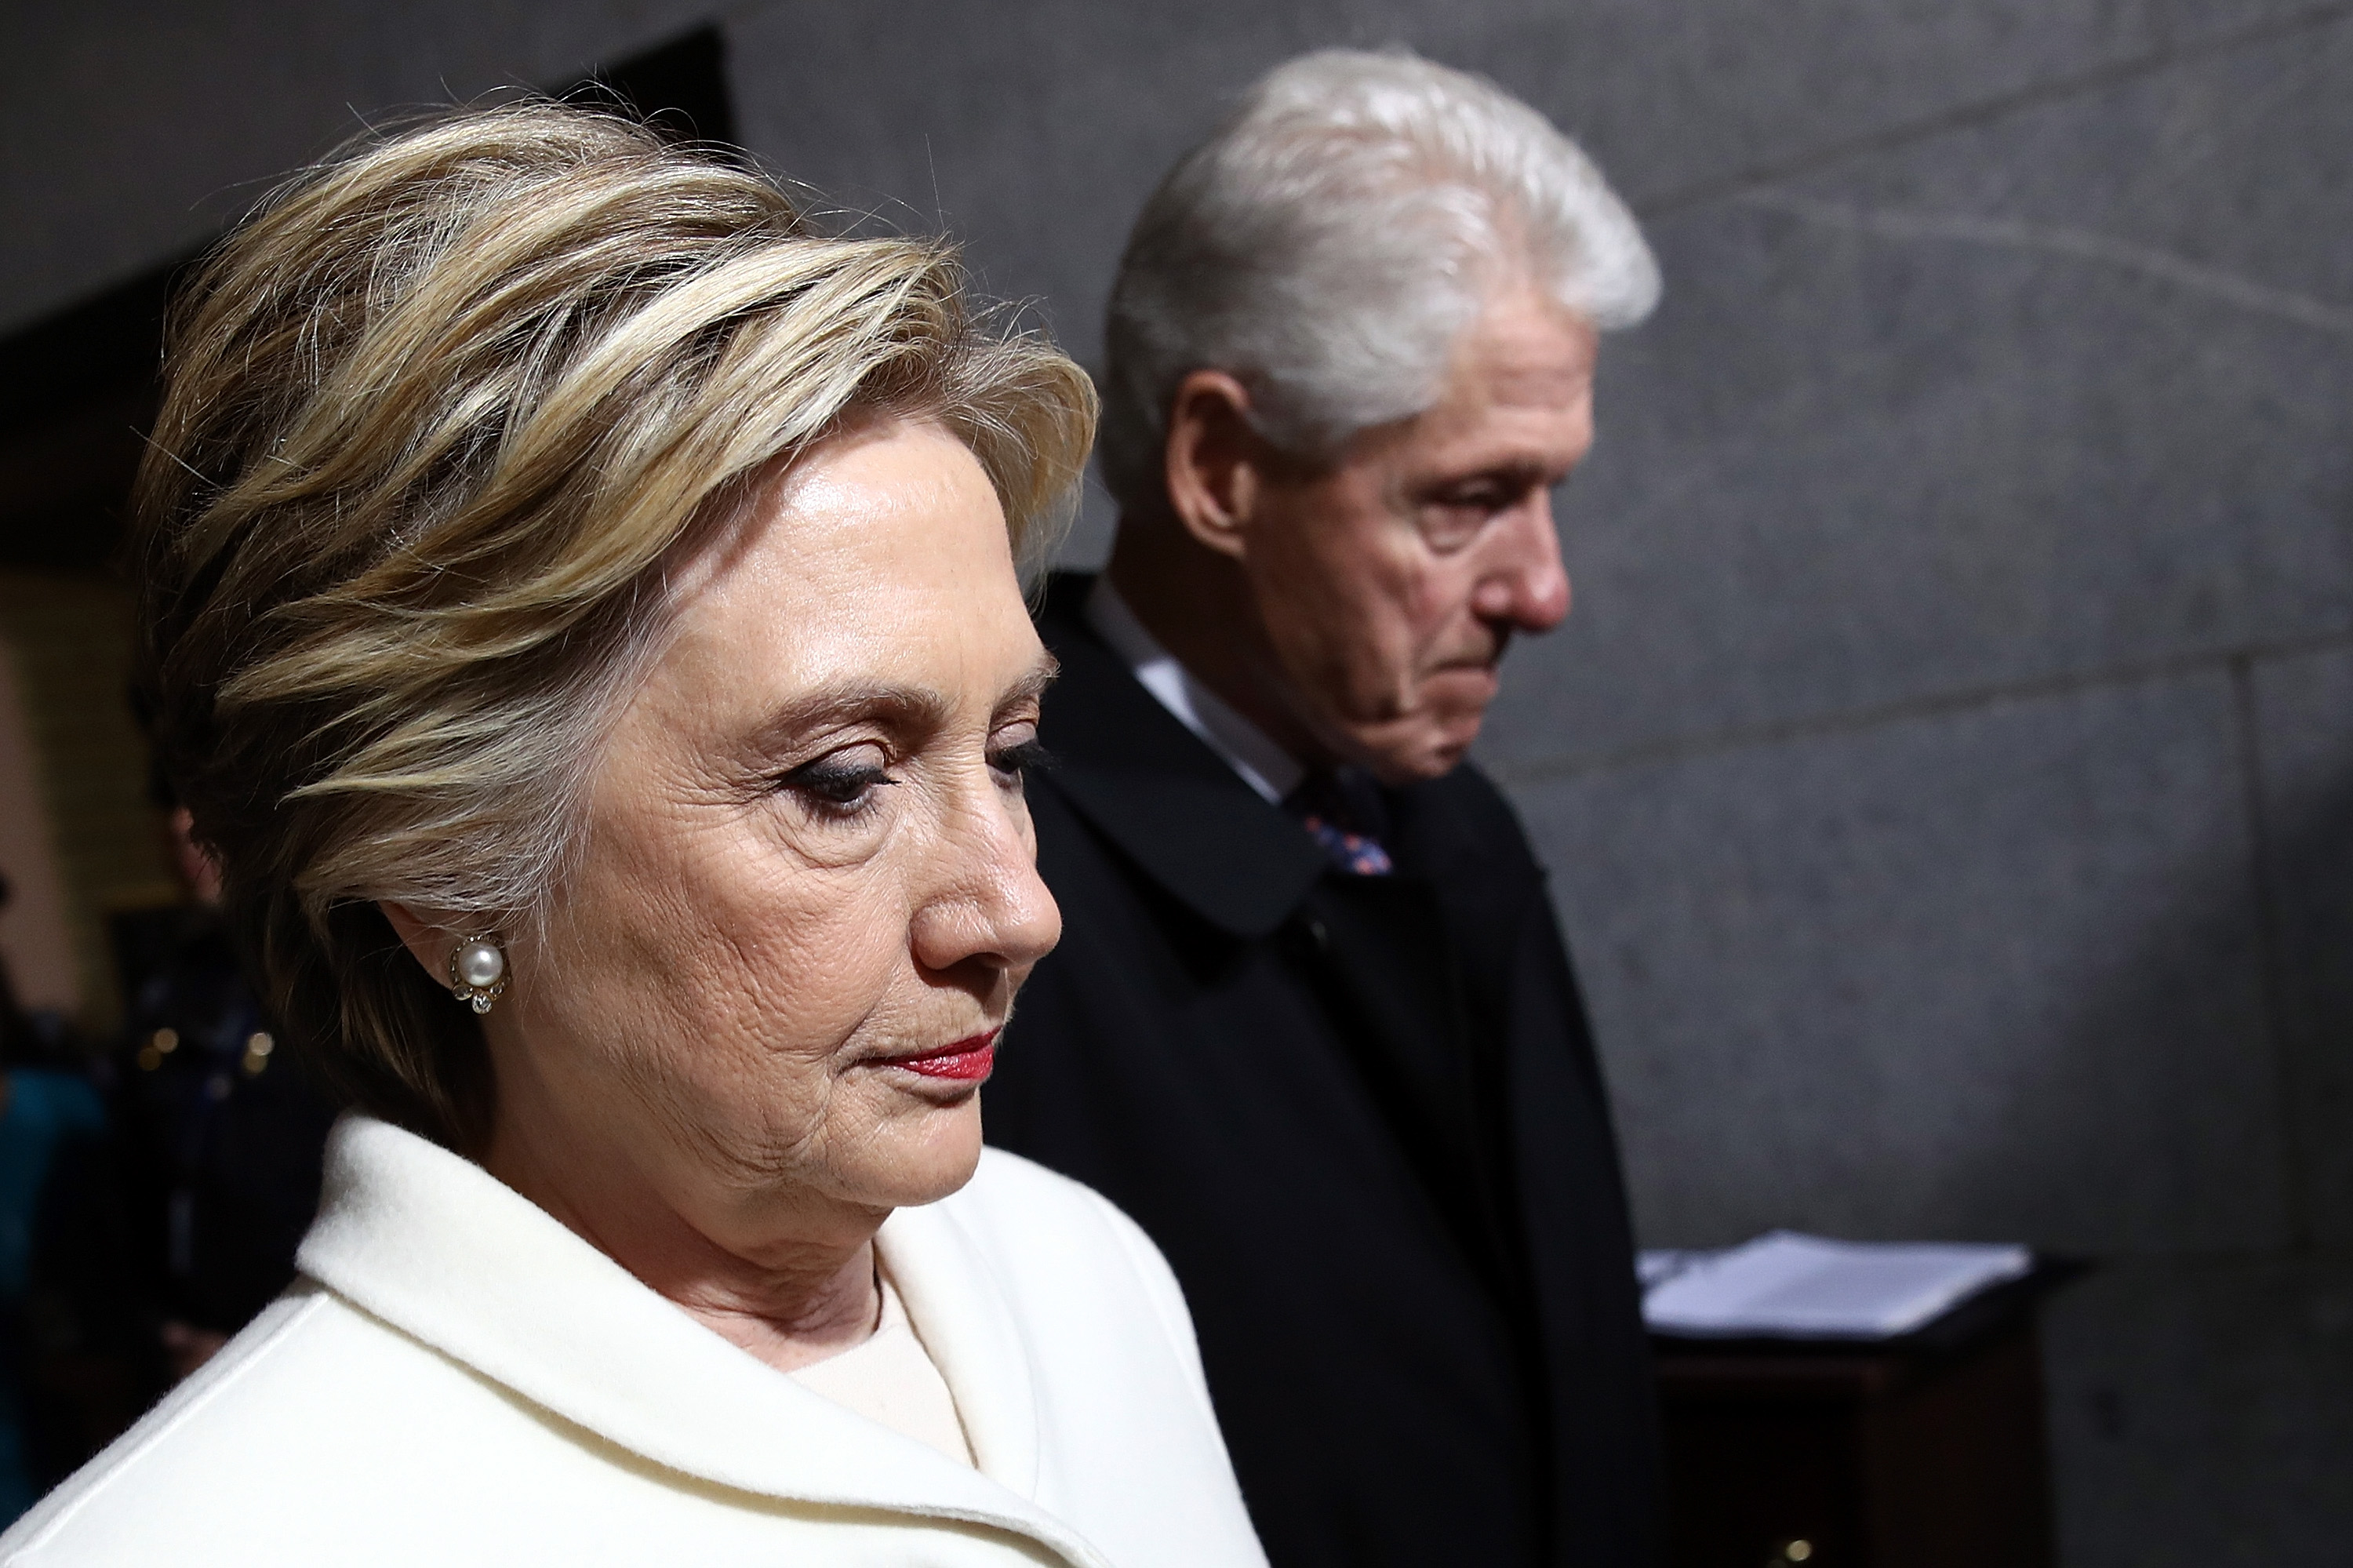 Former Democratic presidential nominee Hillary Clinton (L) and former President Bill Clinton arrive on the West Front of the U.S. Capitol on January 20, 2017 in Washington, D.C., for the inauguration of Donald Trump. (Win McNamee&mdash;Getty Images)